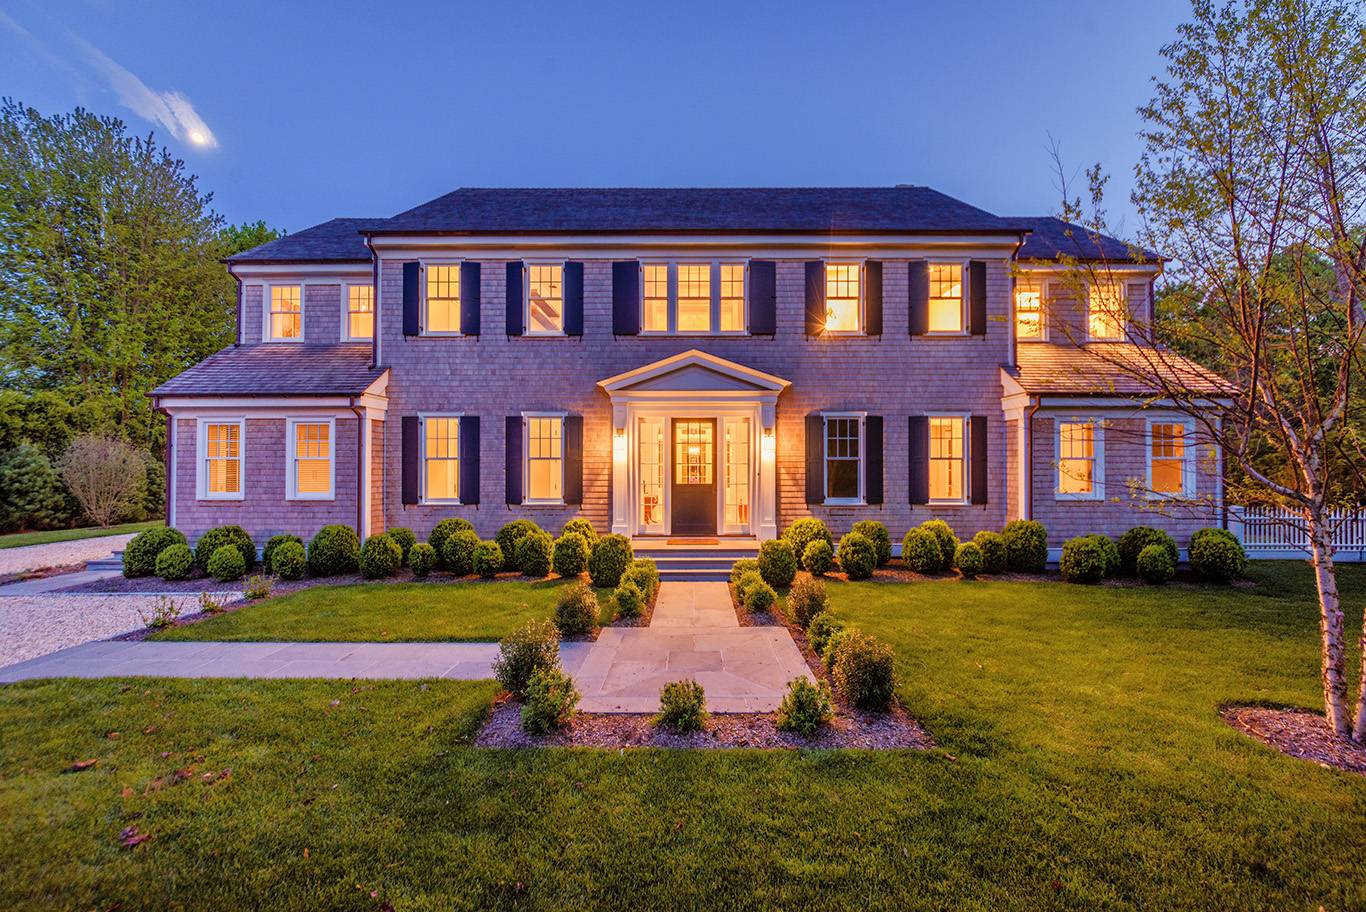 7,000 Square Foot Exquisite Mansion In Southampton